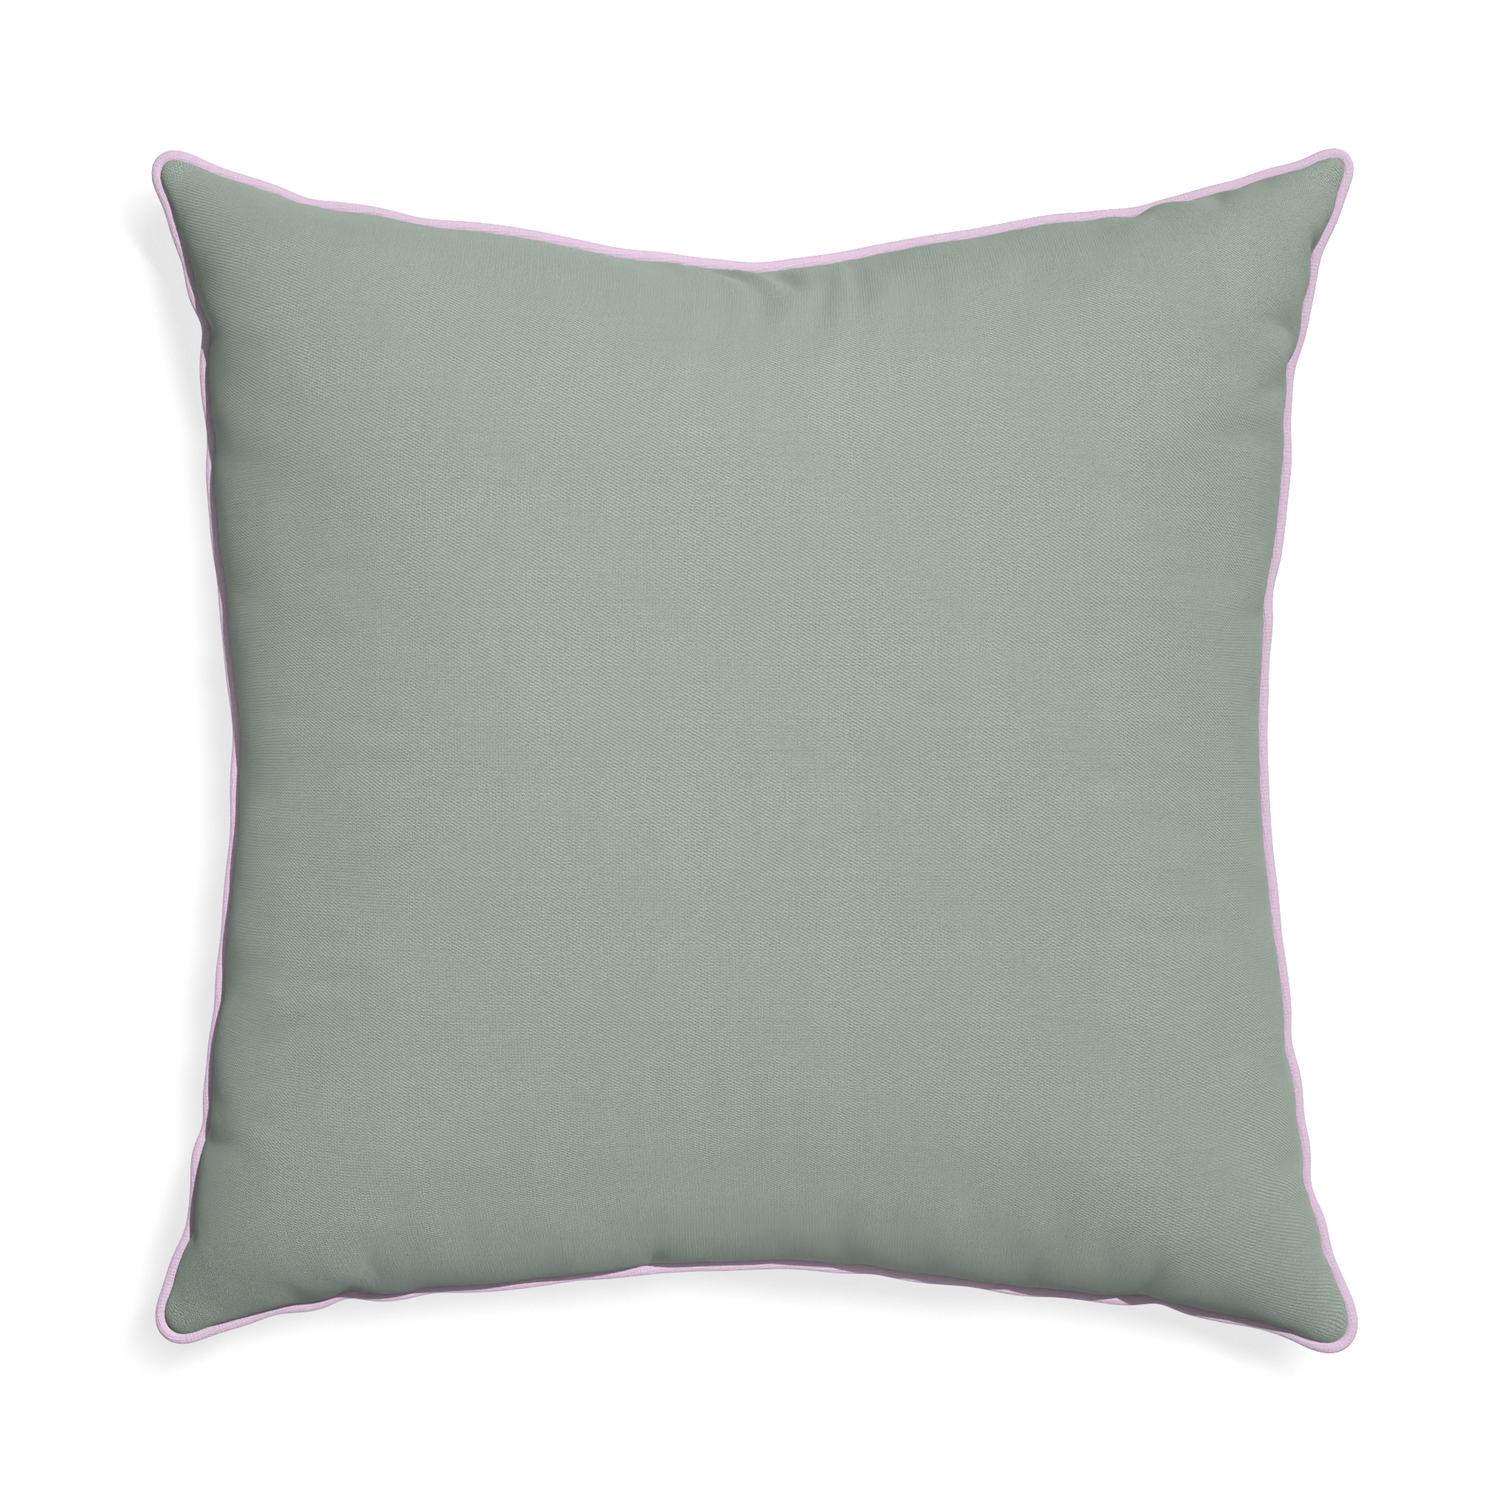 Euro-sham sage custom pillow with l piping on white background